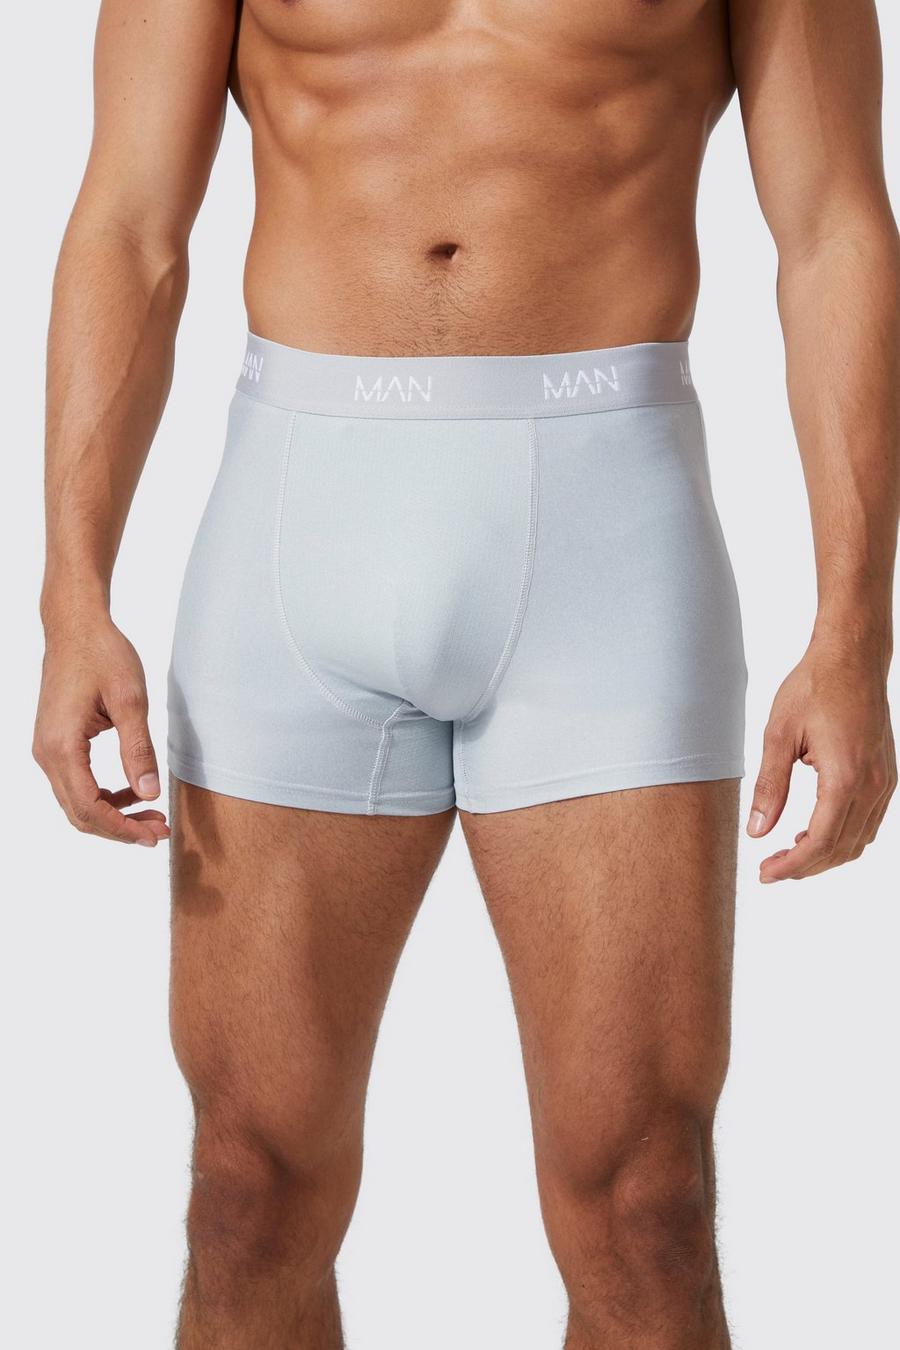 Multi Man Active 5 Pack Gift Boxed Boxers